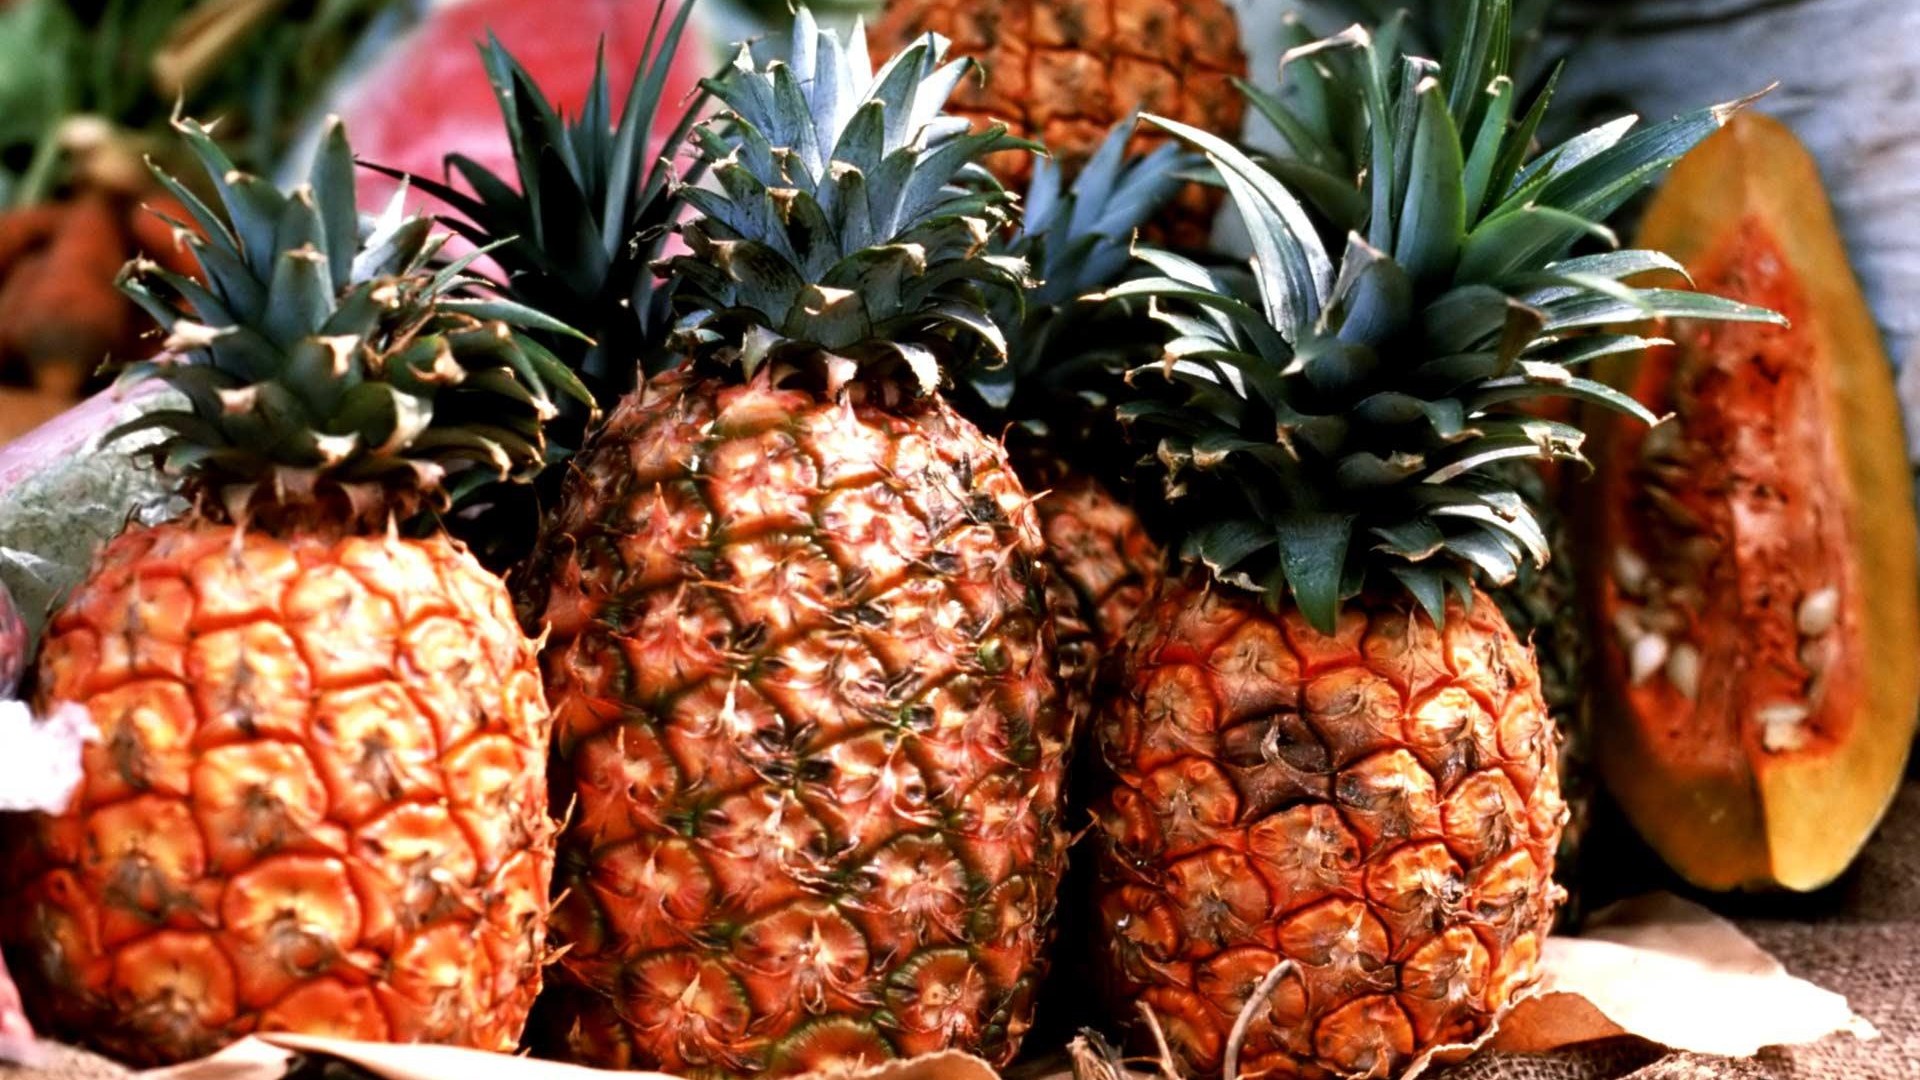 pineapples, Fruits Wallpaper HD / Desktop and Mobile Background